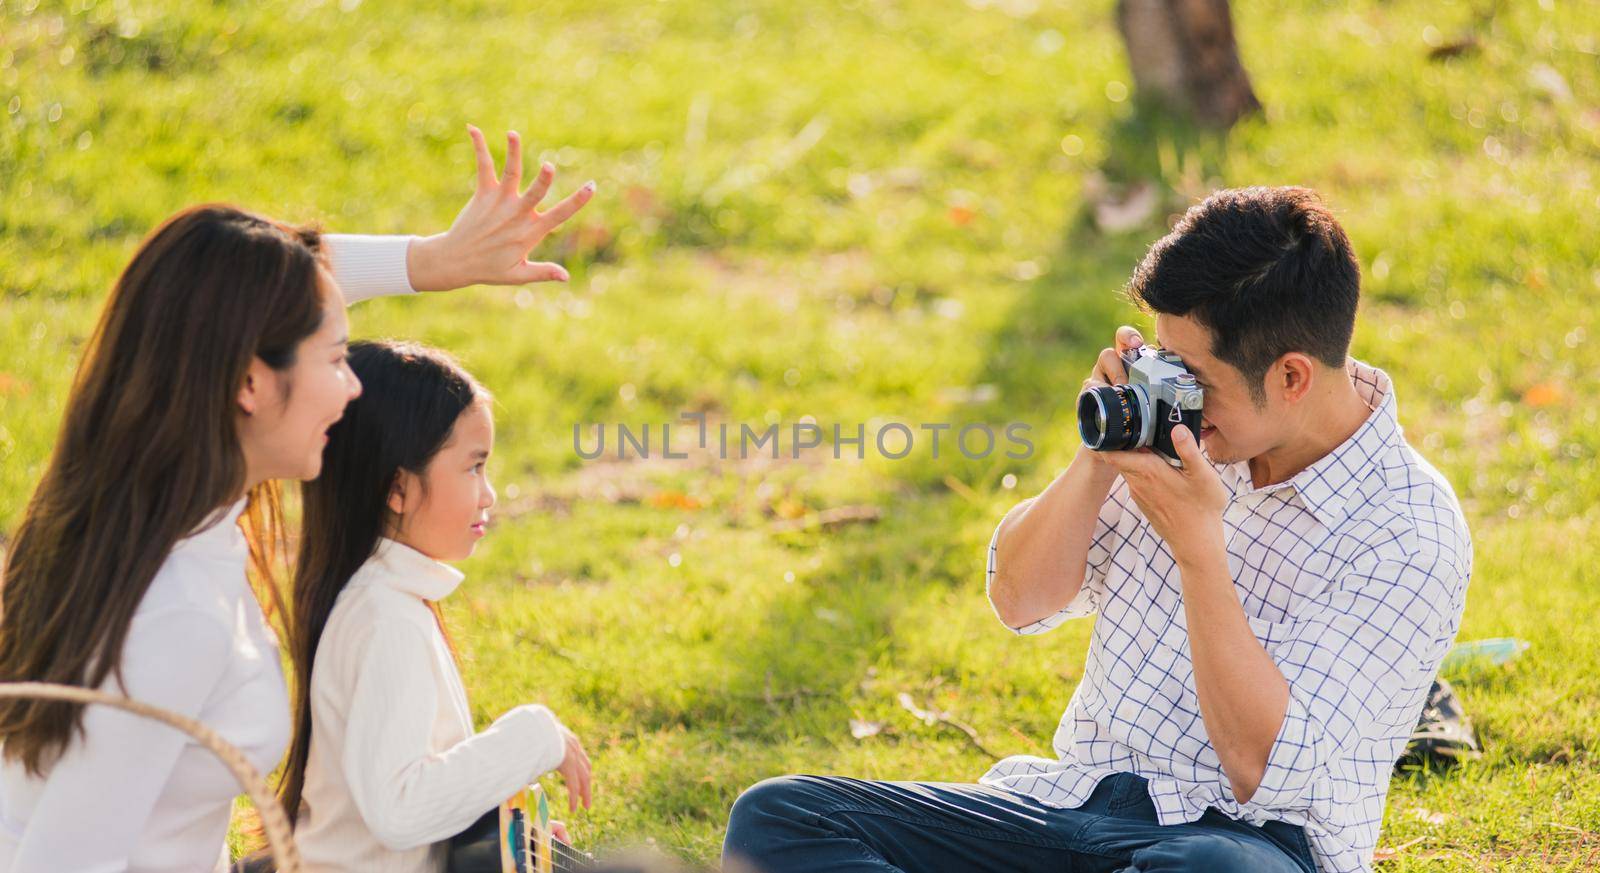 family father, mother and child having fun and enjoying outdoor together sitting on the grass party with shooting photos by Sorapop